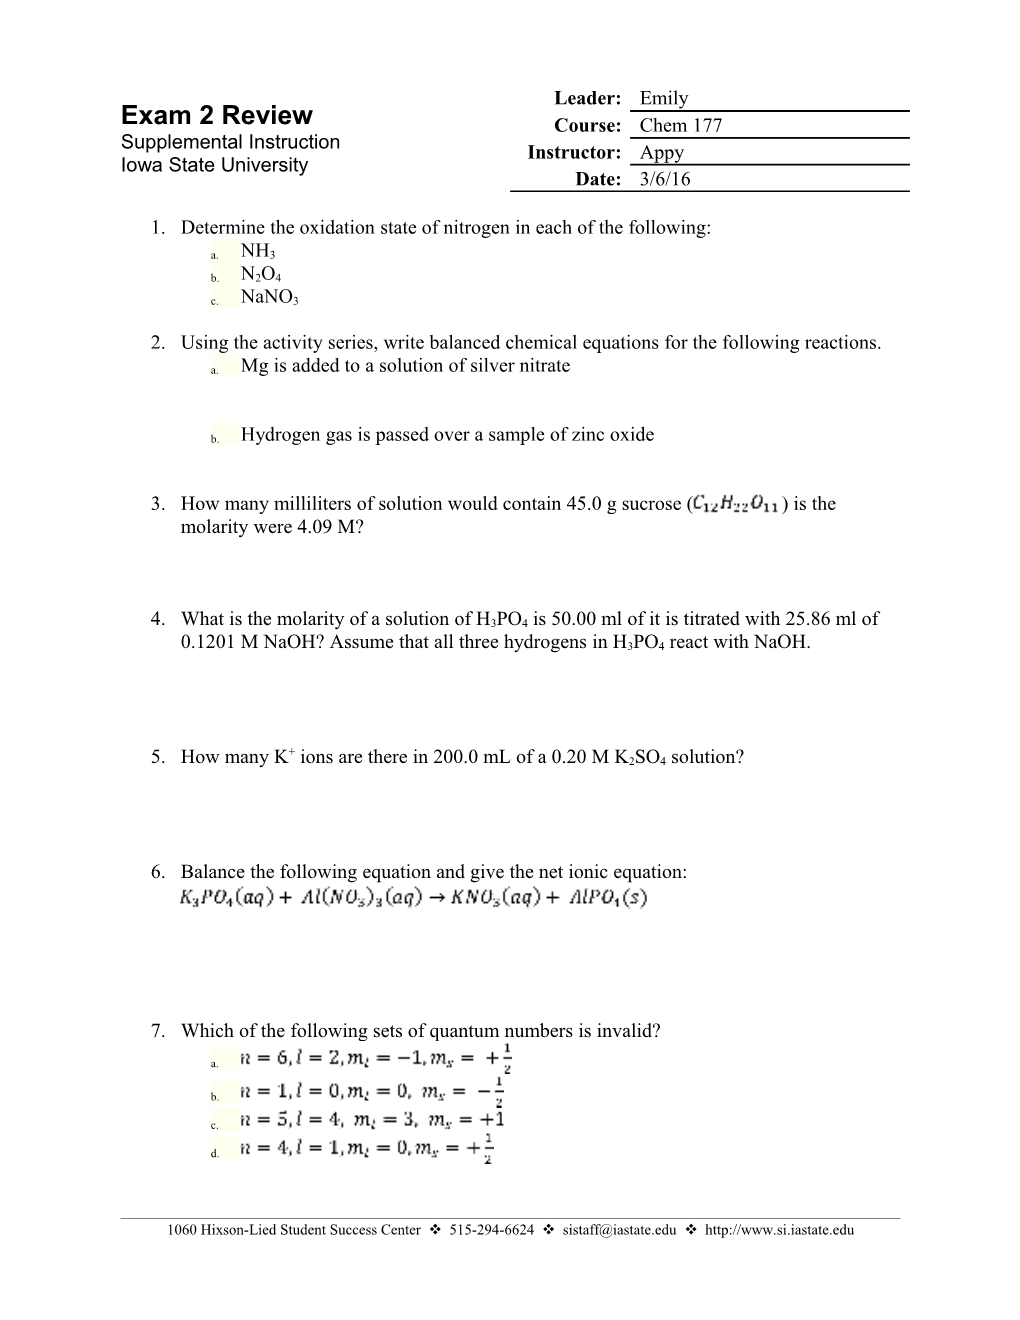 Determine the Oxidation State of Nitrogen in Each of the Following